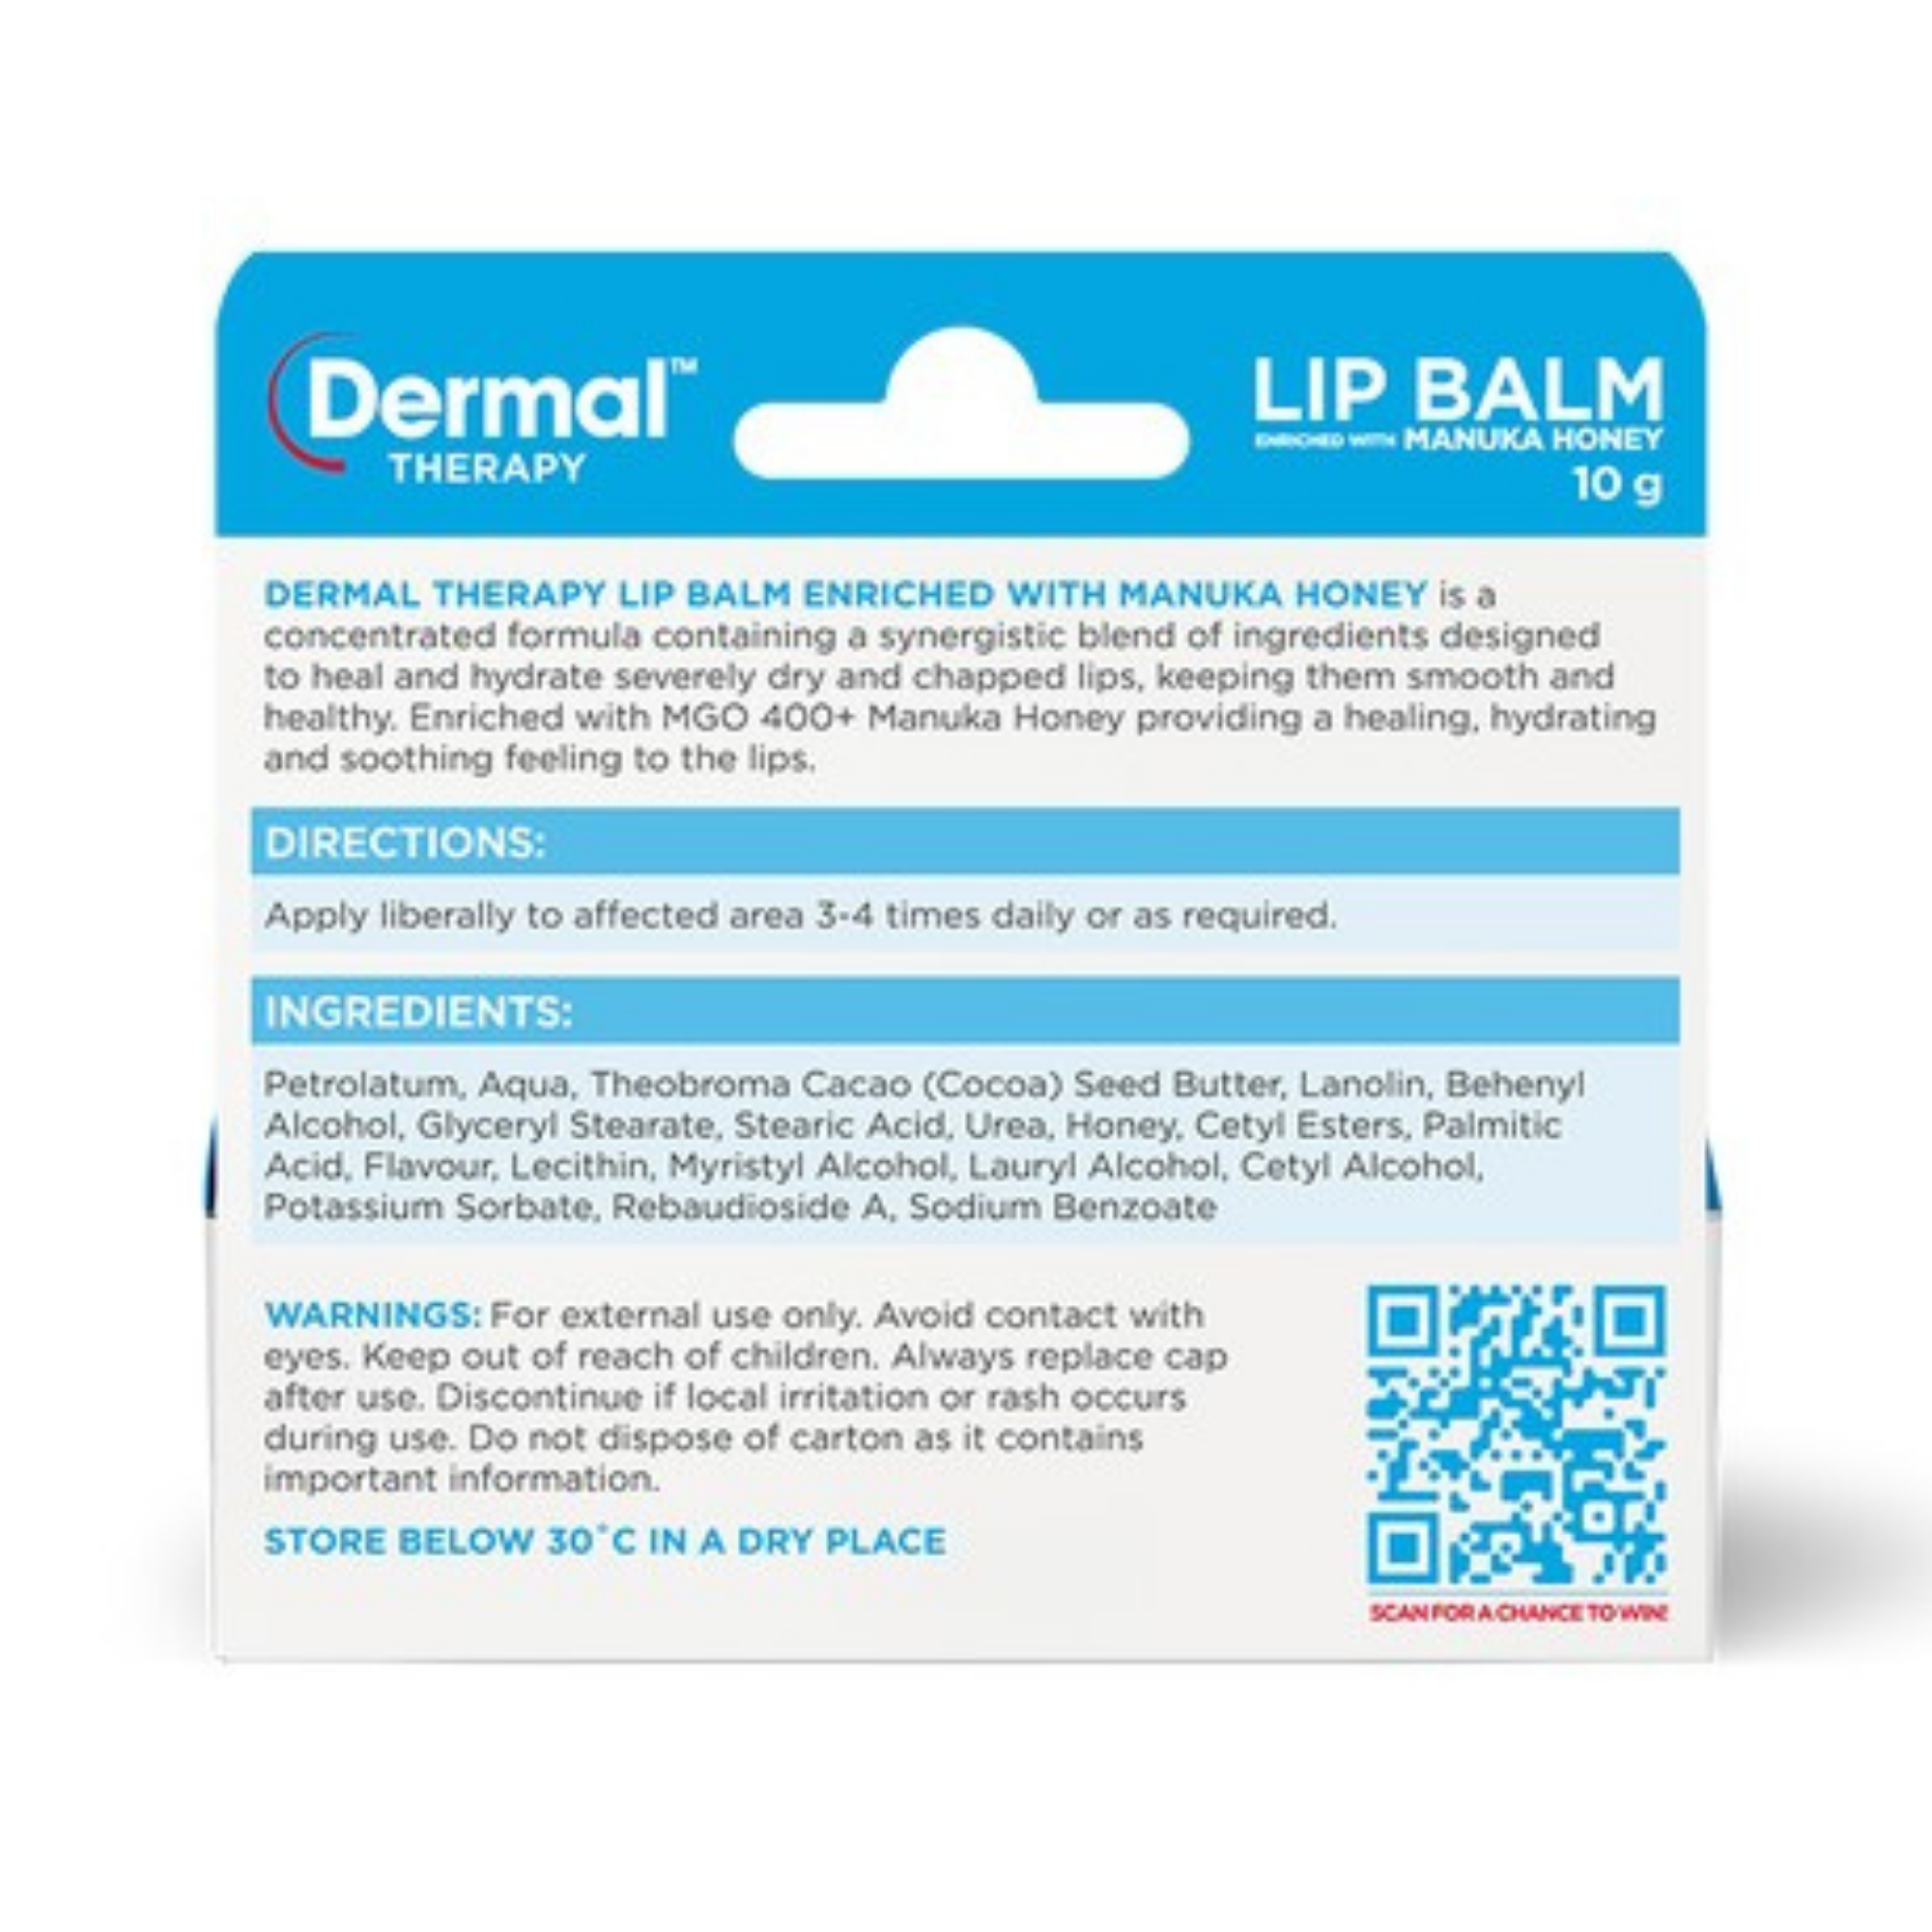 Dermal Therapy Lip Balm Enriched With Manuka Honey 10g